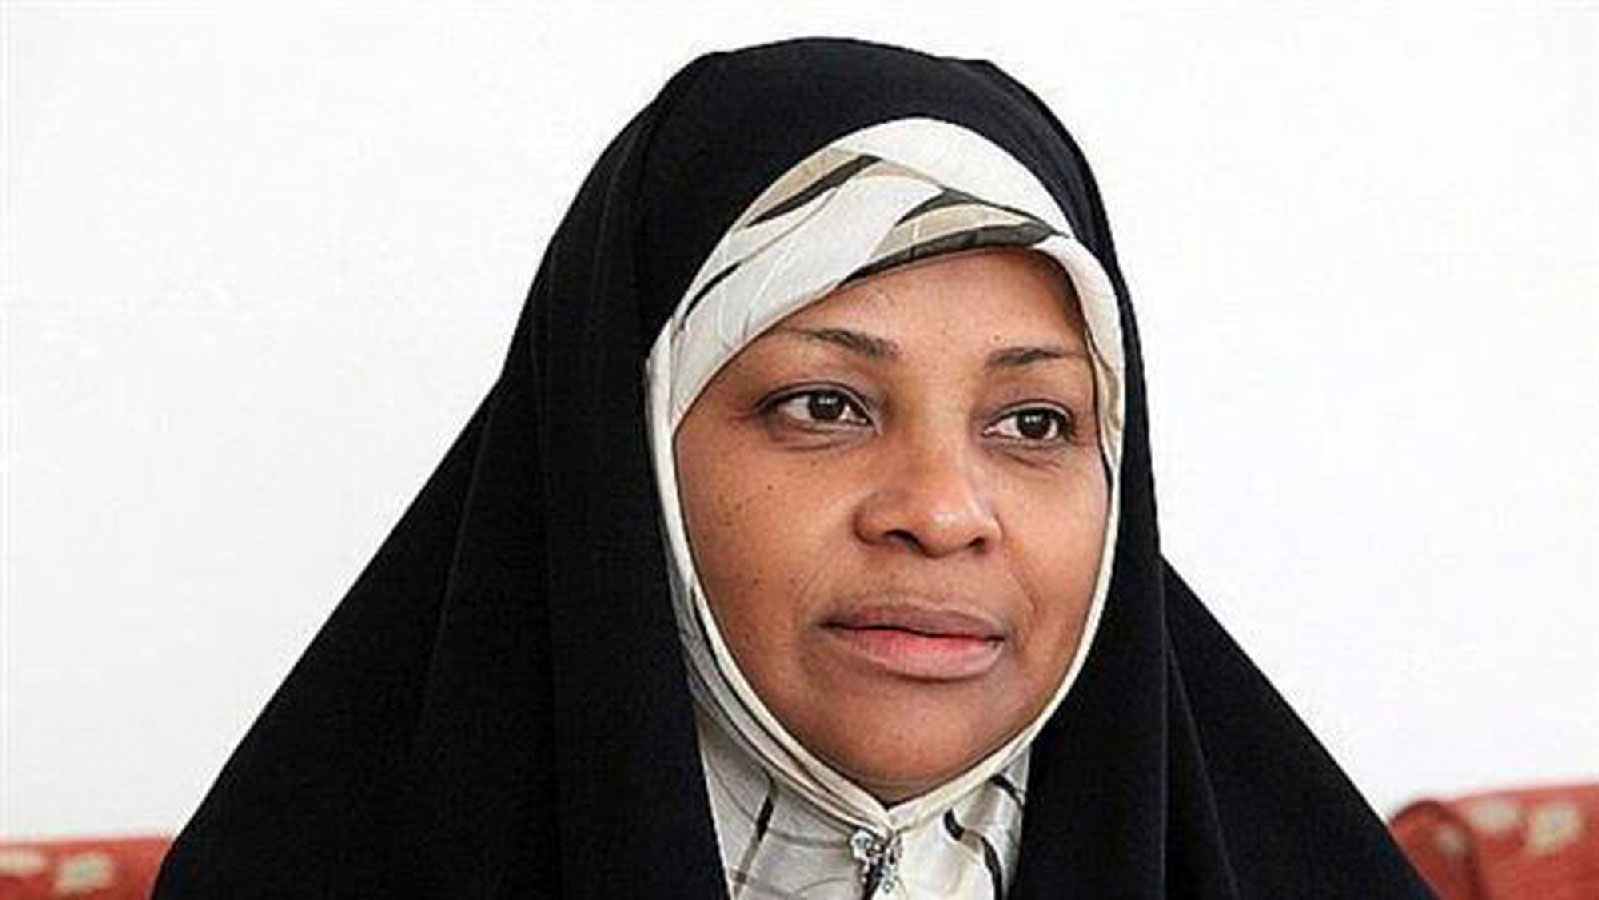 This undated photo provided by Iranian state television's English-language service, Press TV, shows its American-born news anchor Marzieh Hashemi.